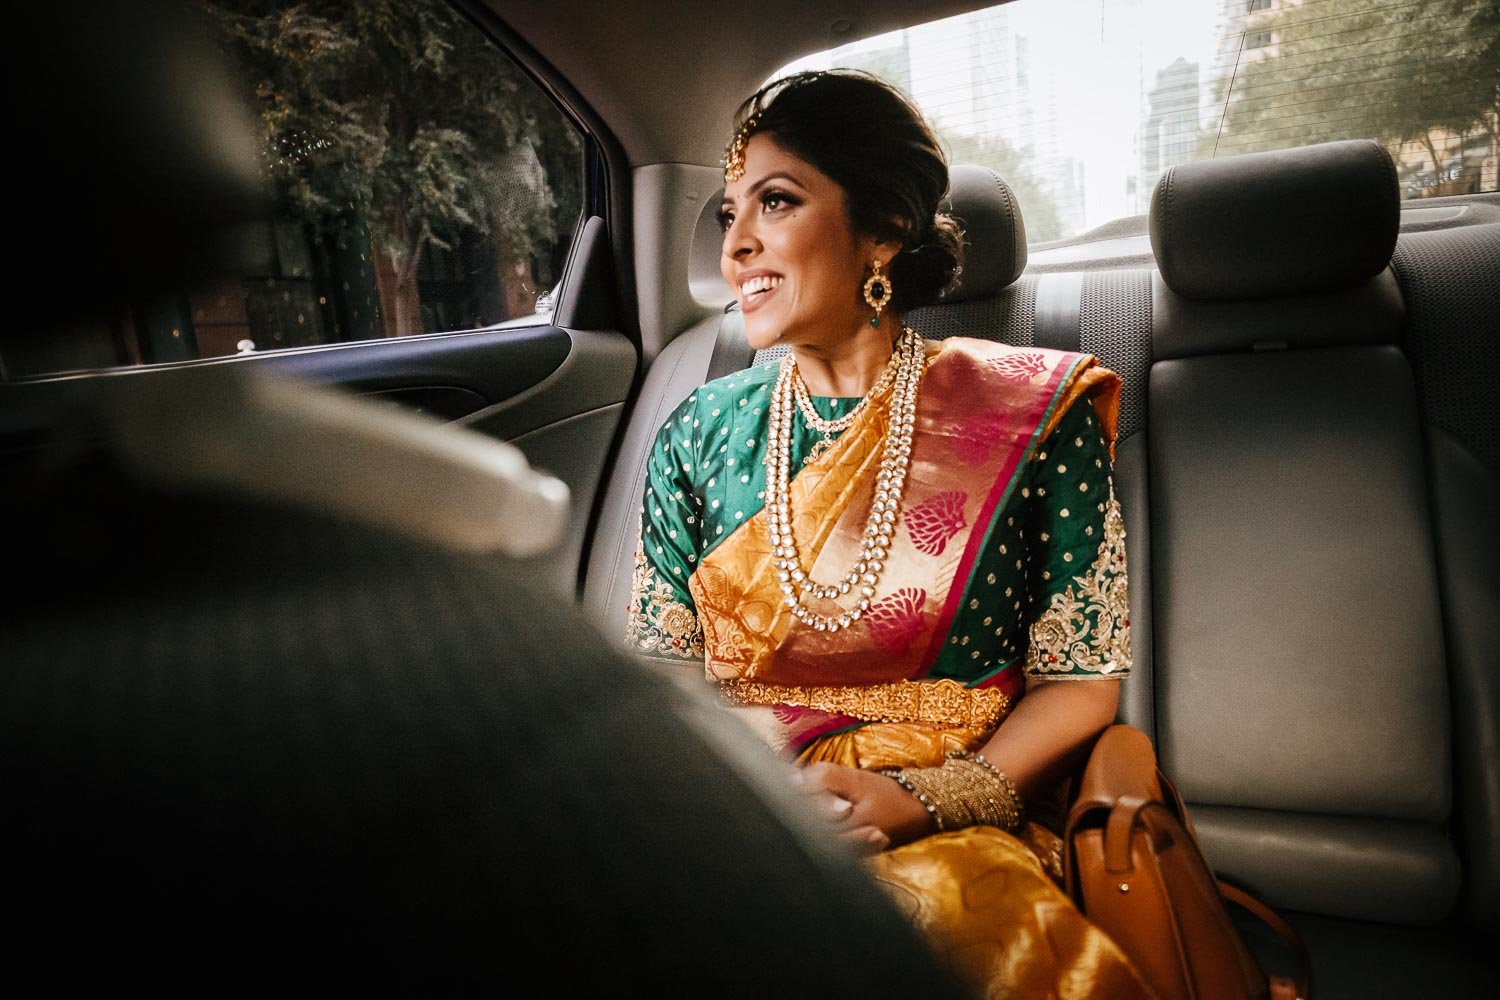 Neha on her way in an Uber for her first look with her husband to be, Mrugesh, in downtown Austin, Texas.